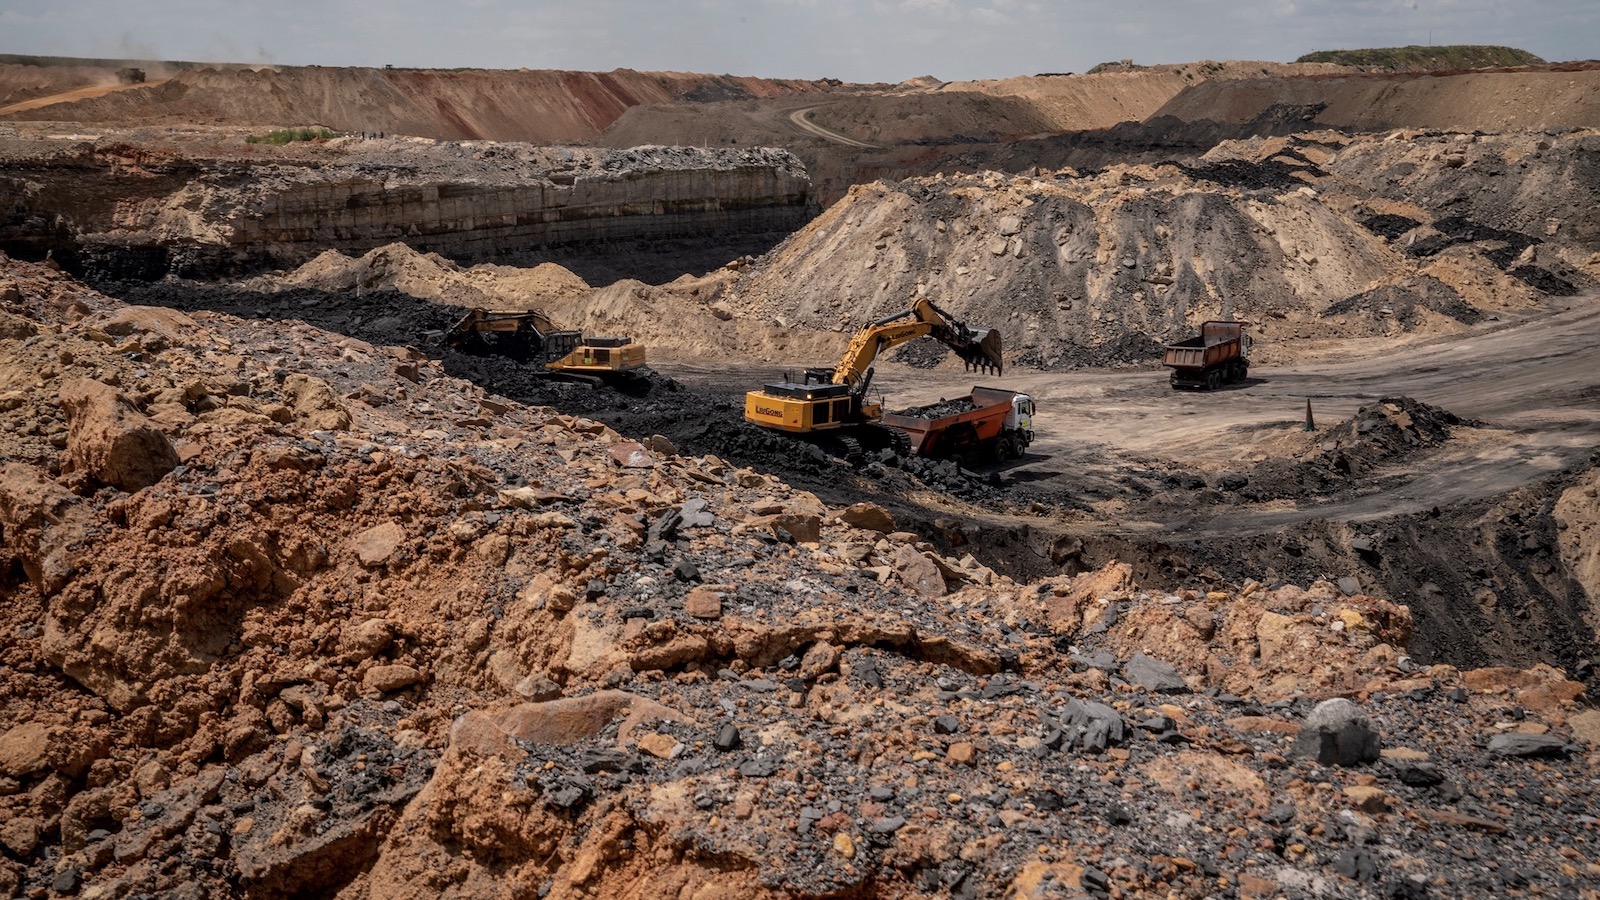 Mining vehicles are seen at a coal mine in Mpumalanga Province, South Africa.